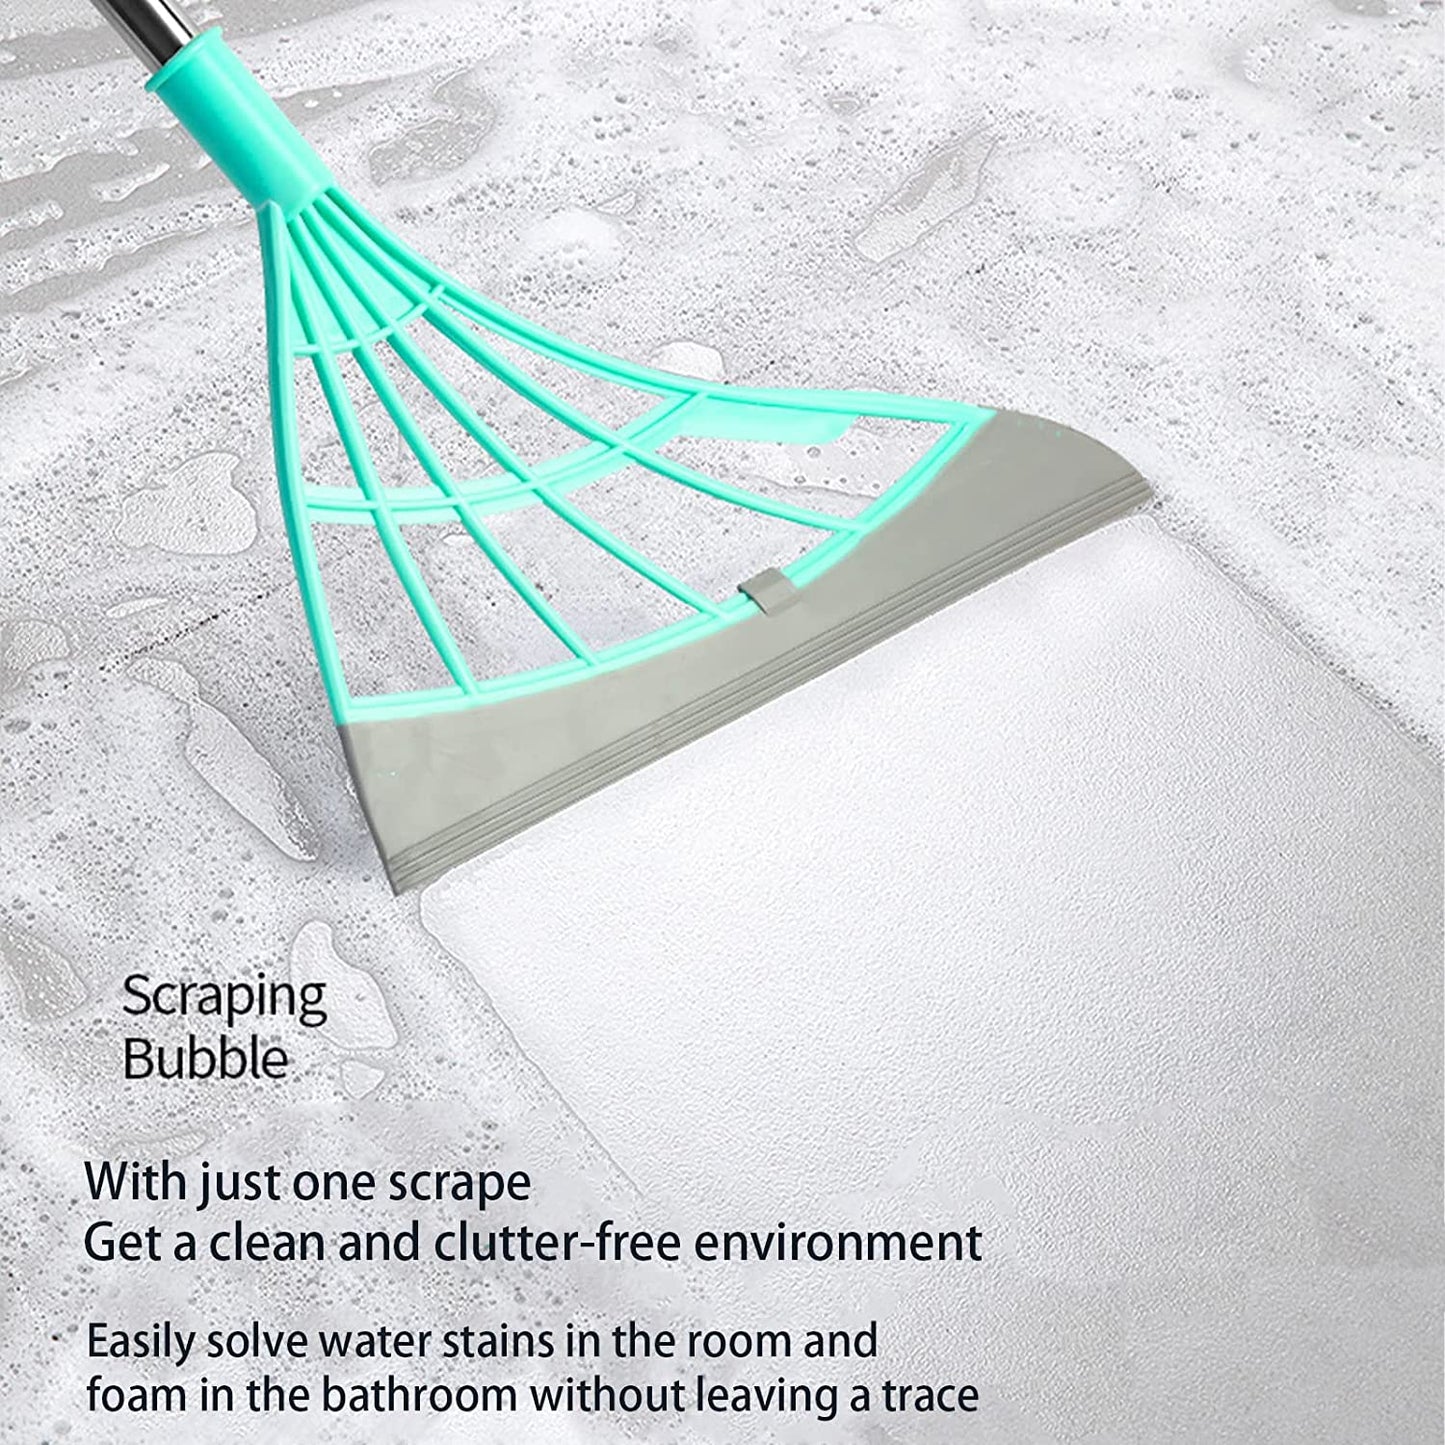 Brotomoyo Multifunction Magic Broom, Wipe Squeeze Silicone Mop, Silicone Bathroom Toilet Glass Scraper - Floor Clean Tools Wash Windows Pet Hair Non-Stick Sweeping and Kitchen (Green)